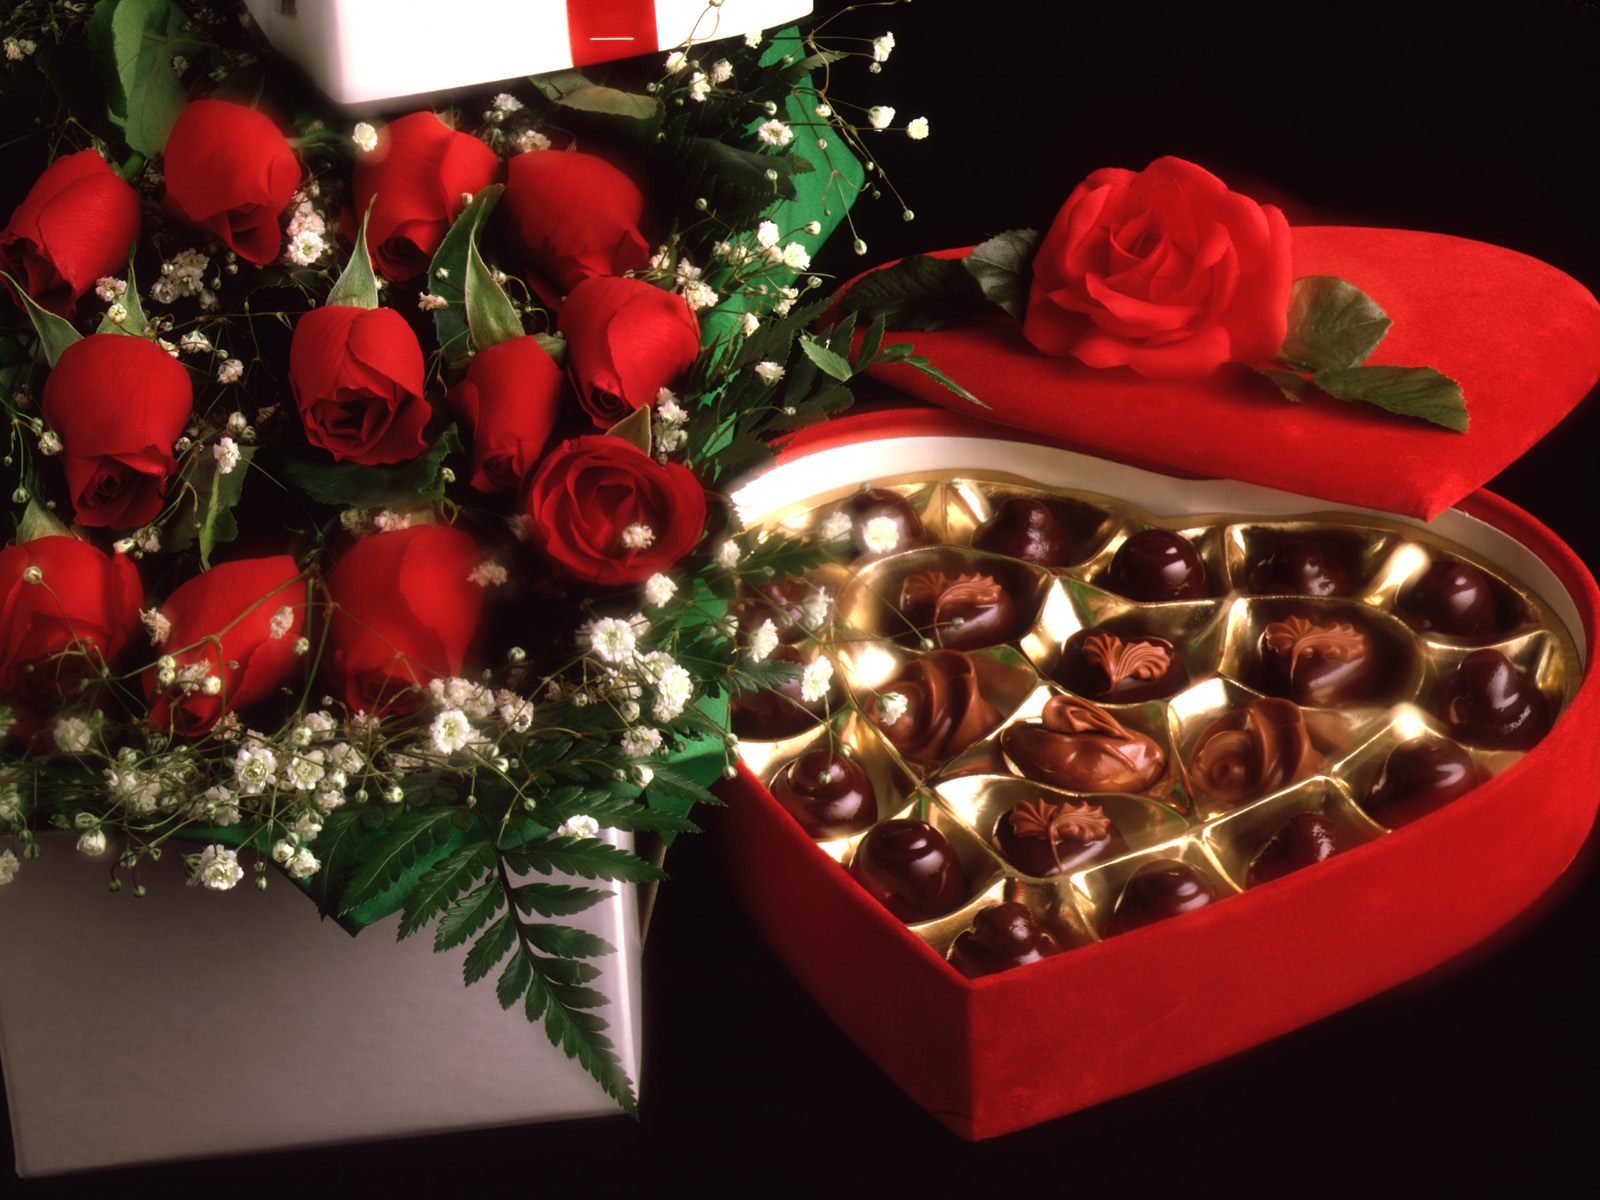 Red Roses And Chocolate Gifts - HD Wallpaper 